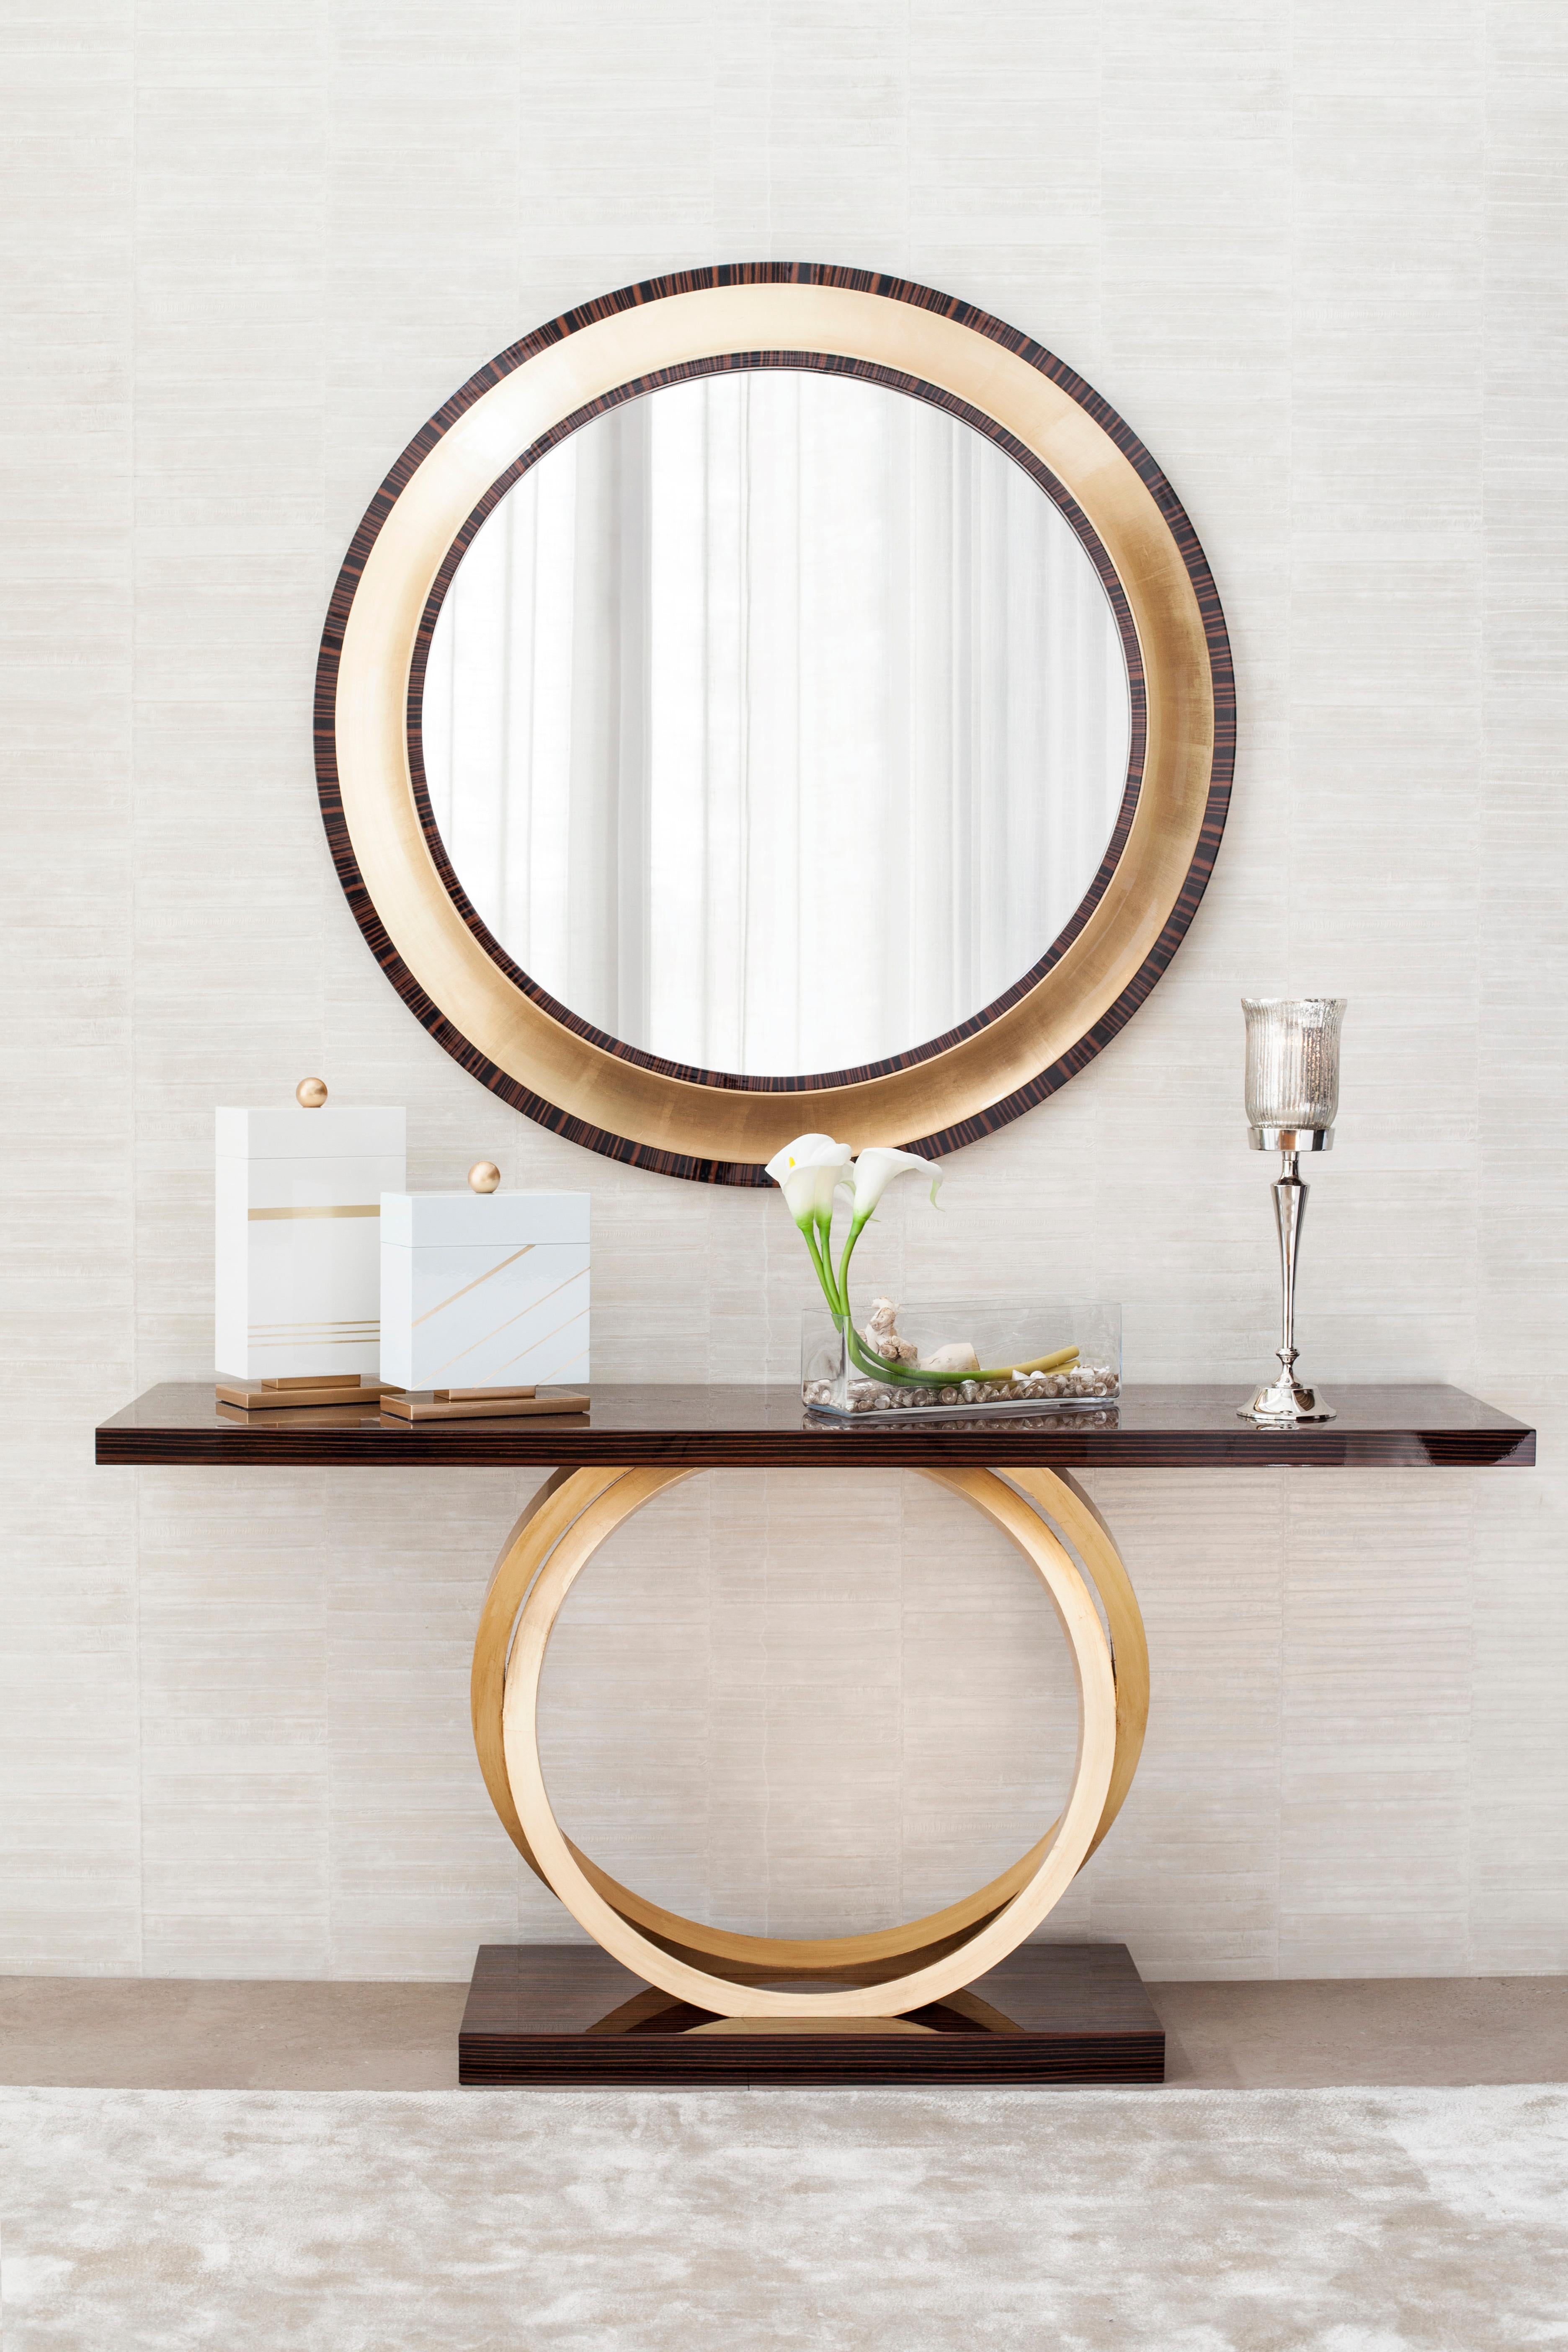 Grifo Wall Mirror, Modern Collection, Handcrafted in Portugal - Europe by GF Modern.

Grifo is a round mirror in a classical style that reflects his graceful personality. The vivid contrast between the two rings in Ebony and the central ring of